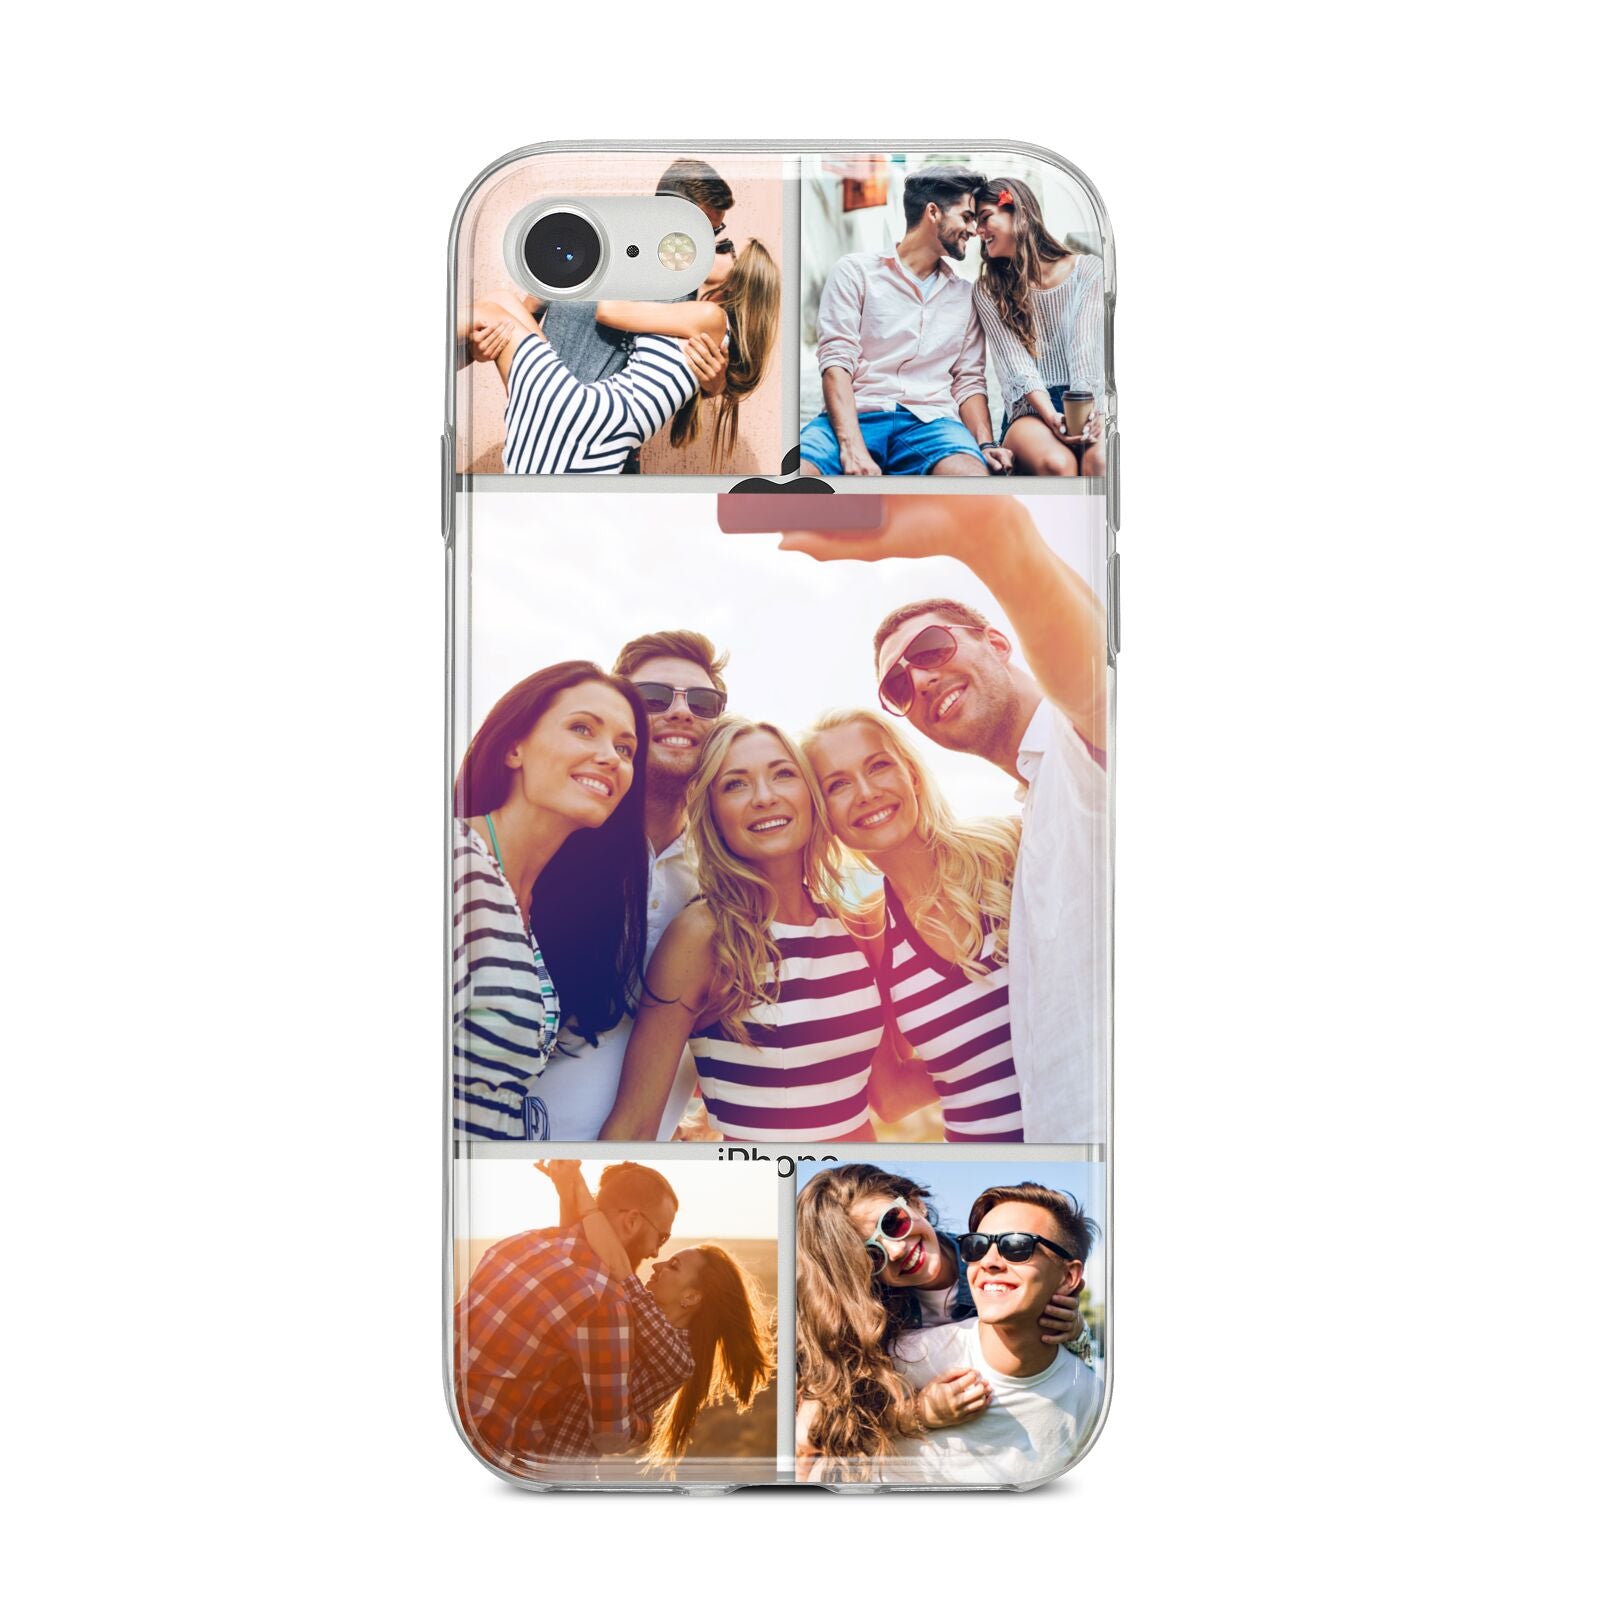 Tile Photo Collage Upload iPhone 8 Bumper Case on Silver iPhone